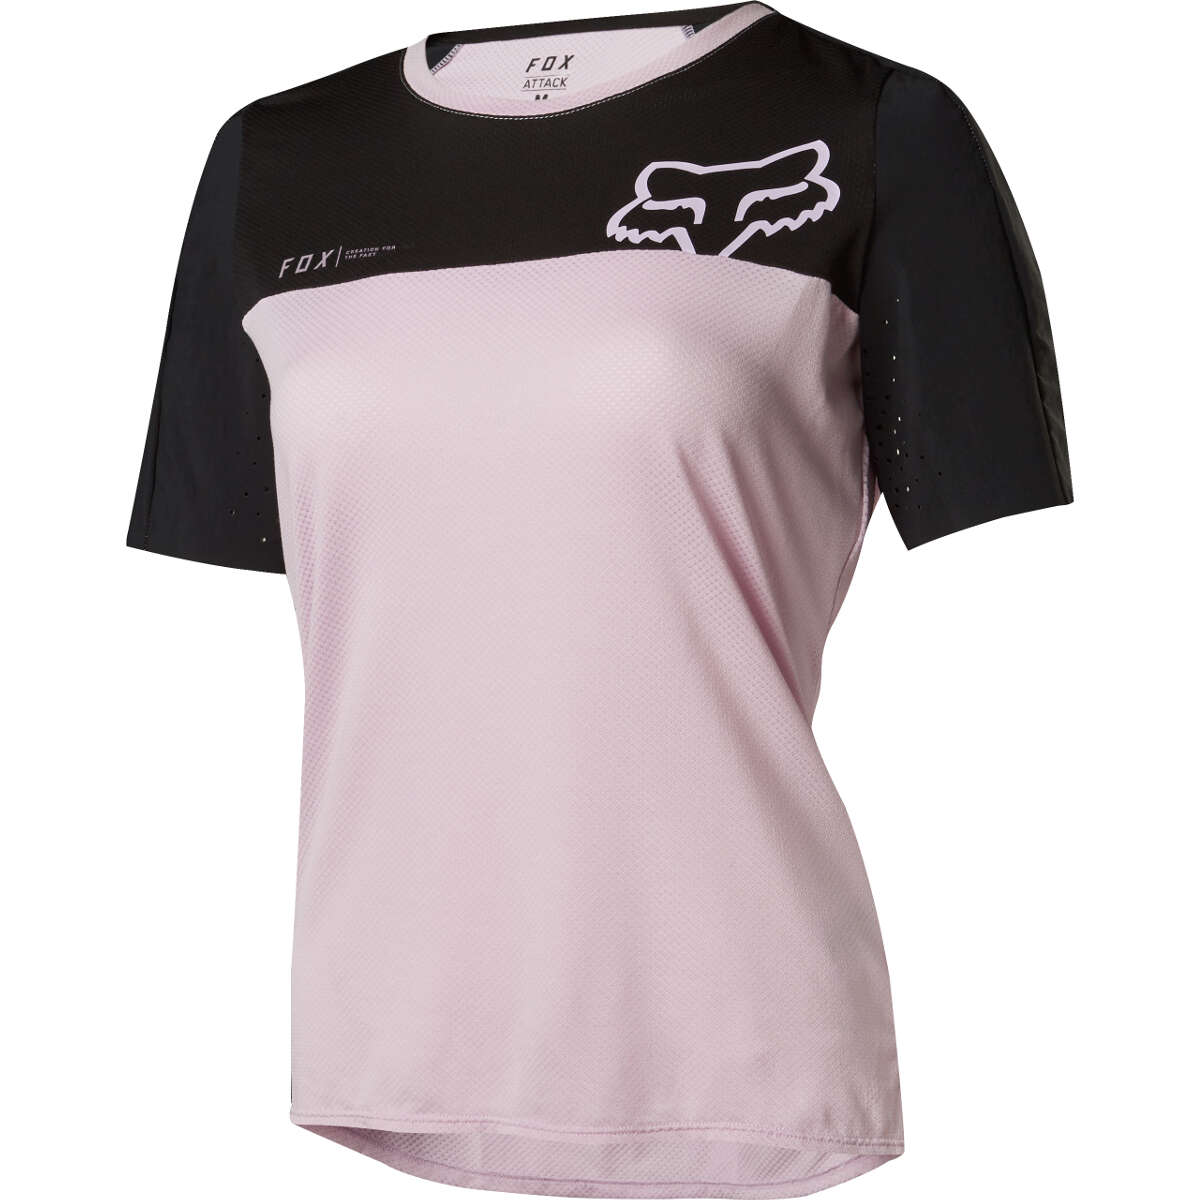 Fox Femme Maillot VTT Manches Courtes Attack Lilac